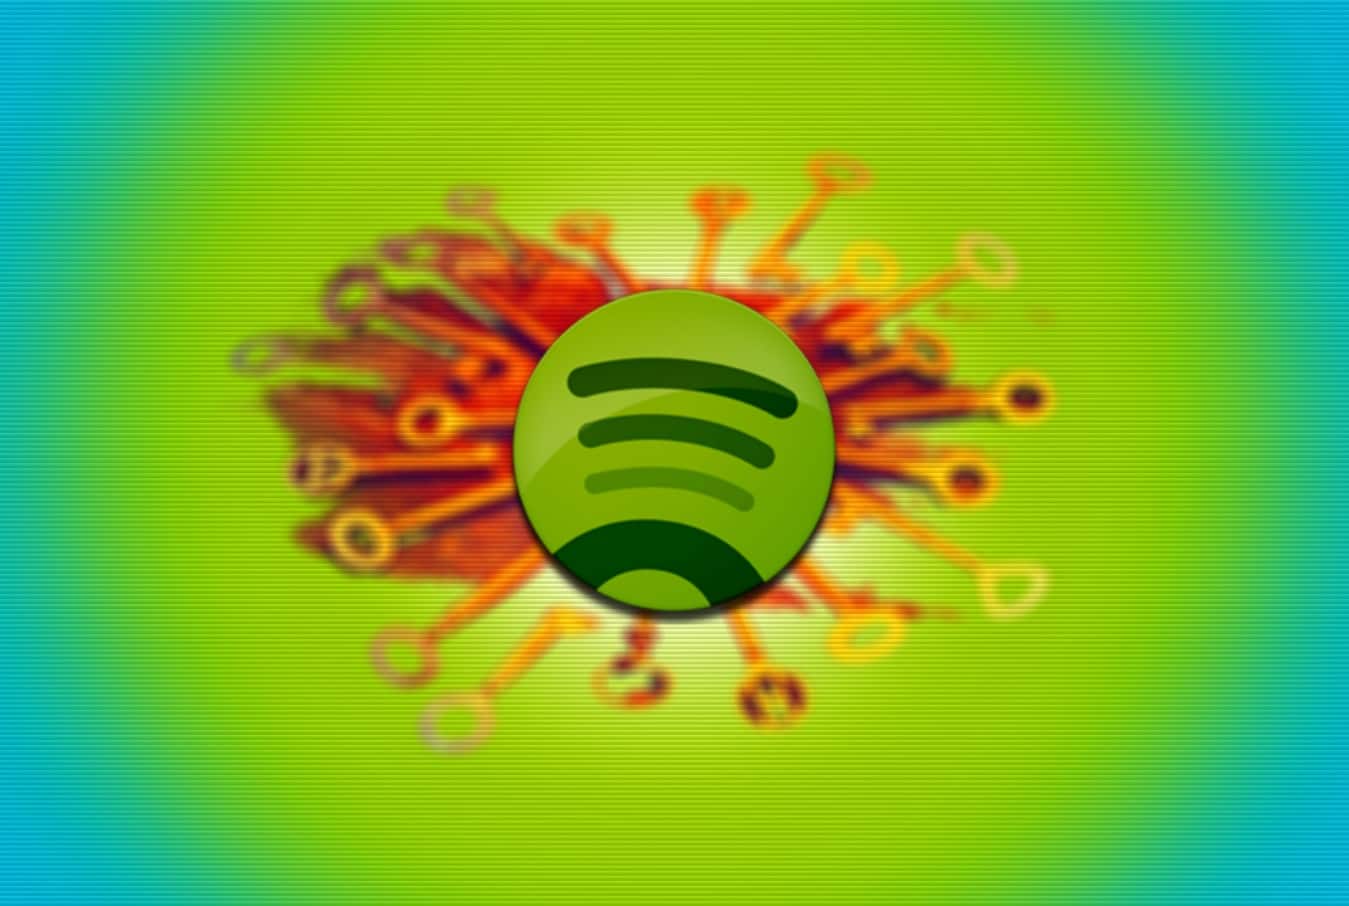 Database mess up expose mass credentials stuffing against Spotify users